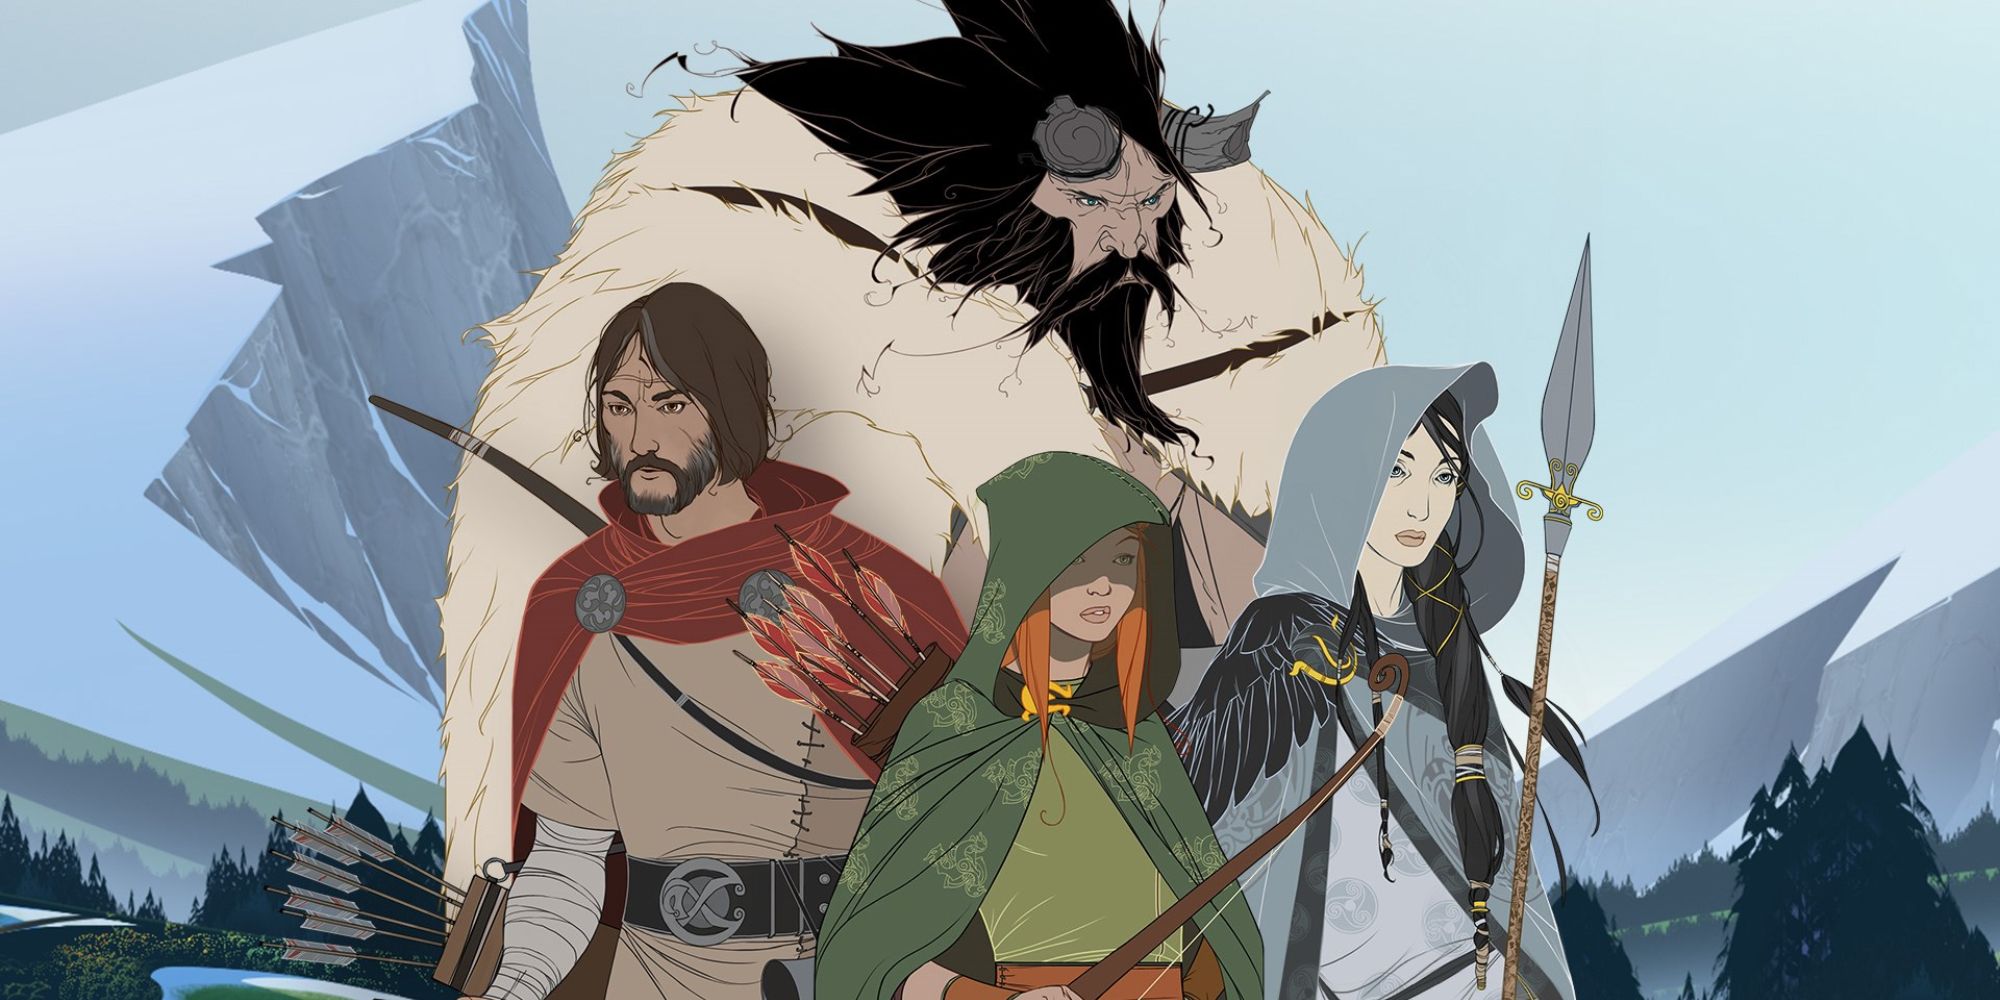 Best RPG Soundtracks cover art for the The Banner Saga Trilogy featuring the characters Rook, Alette, Juno and Bolverk stood together in the middle against a wintery fantasy landscape